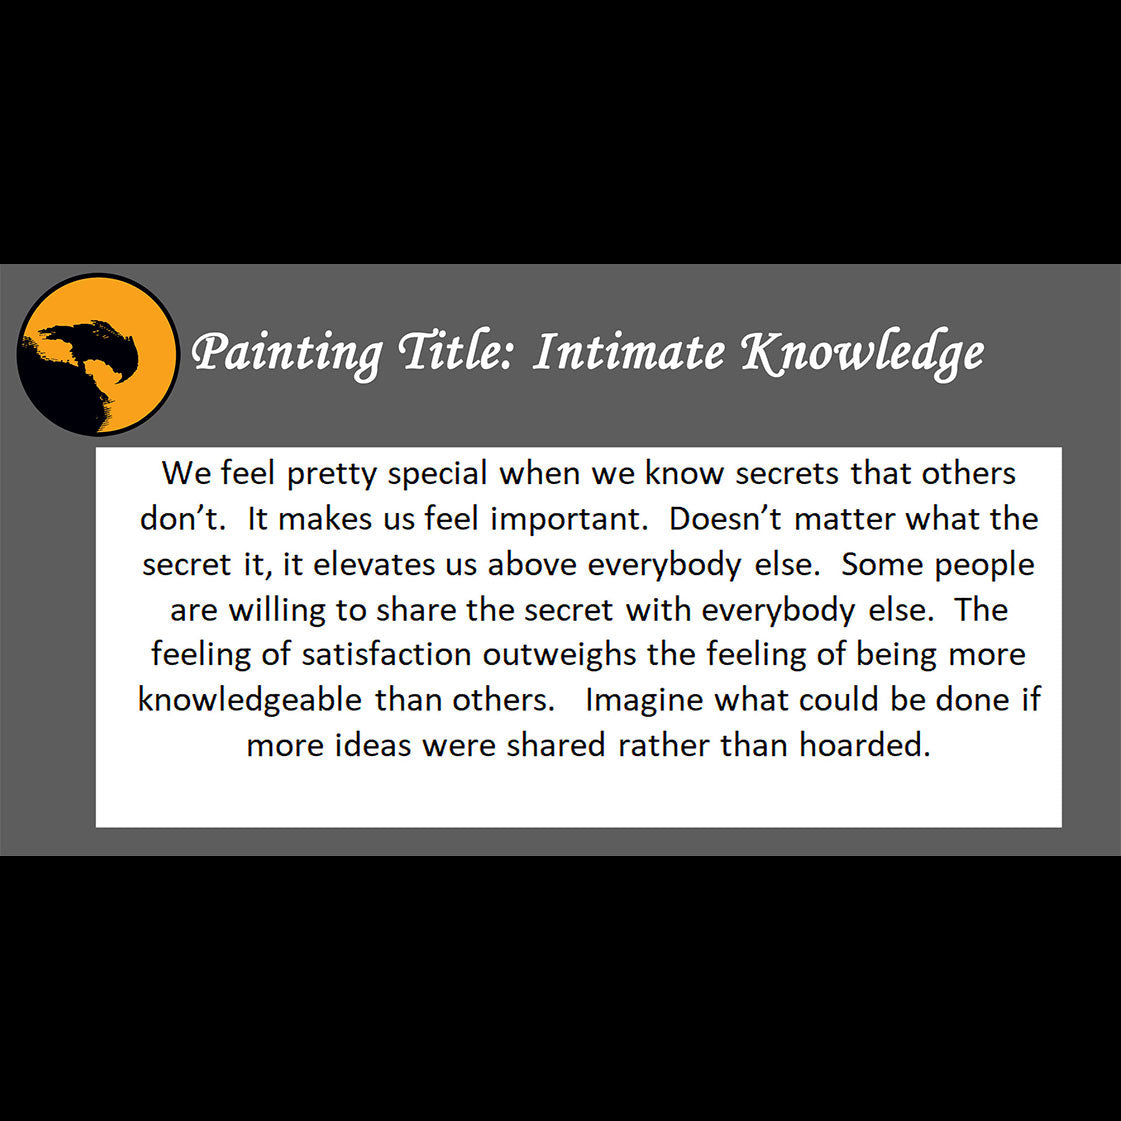 Intimate Knowledge - about sharing secrets - 11x14, 11x17 Print